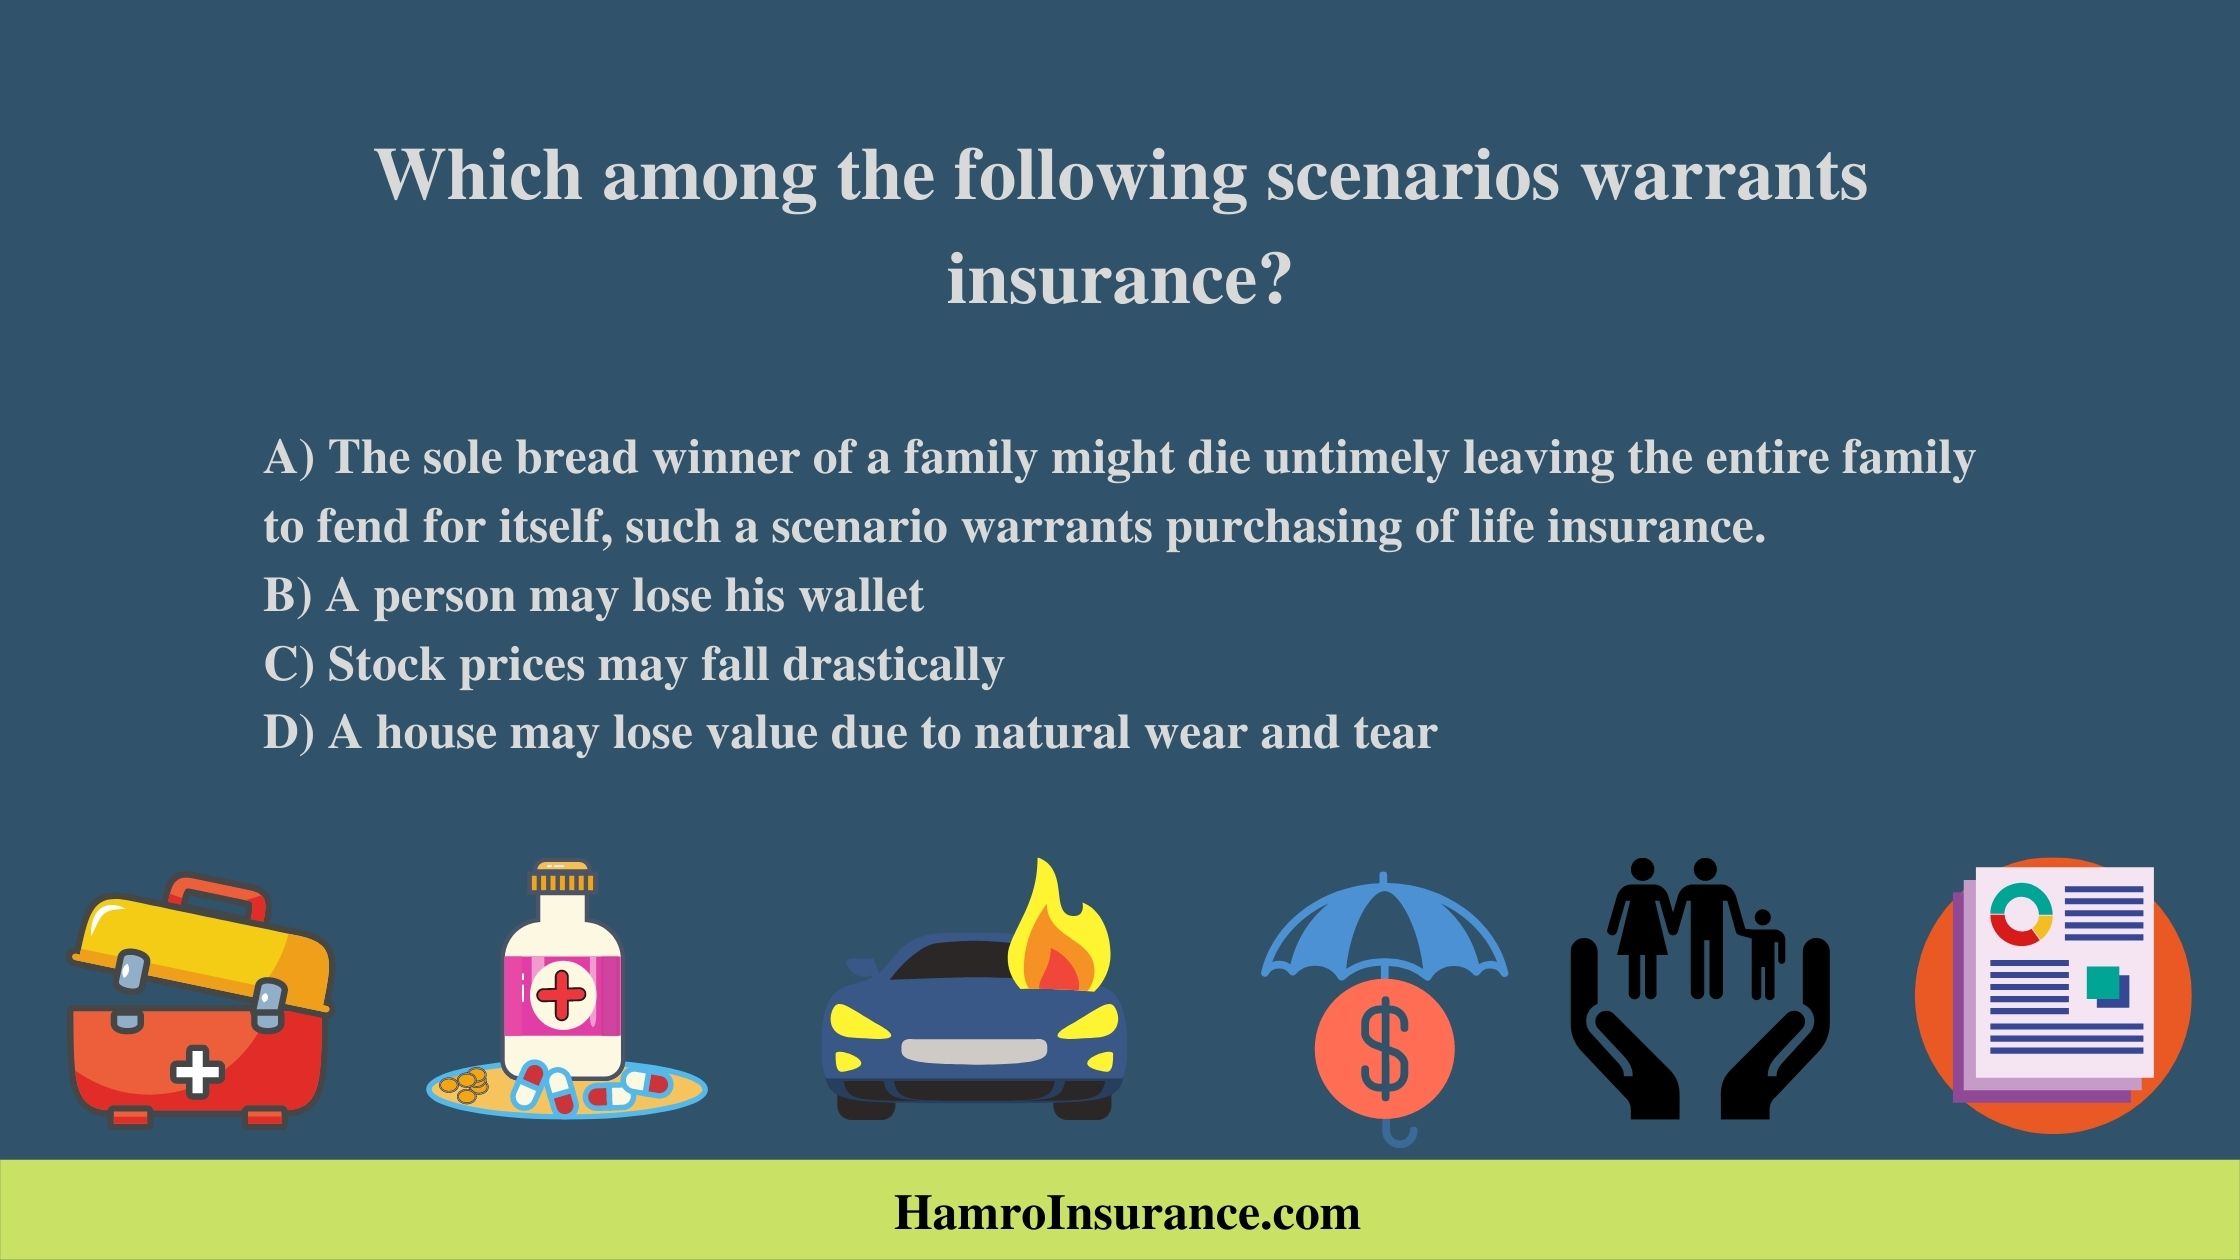 Which among the following scenarios warrants insurance?